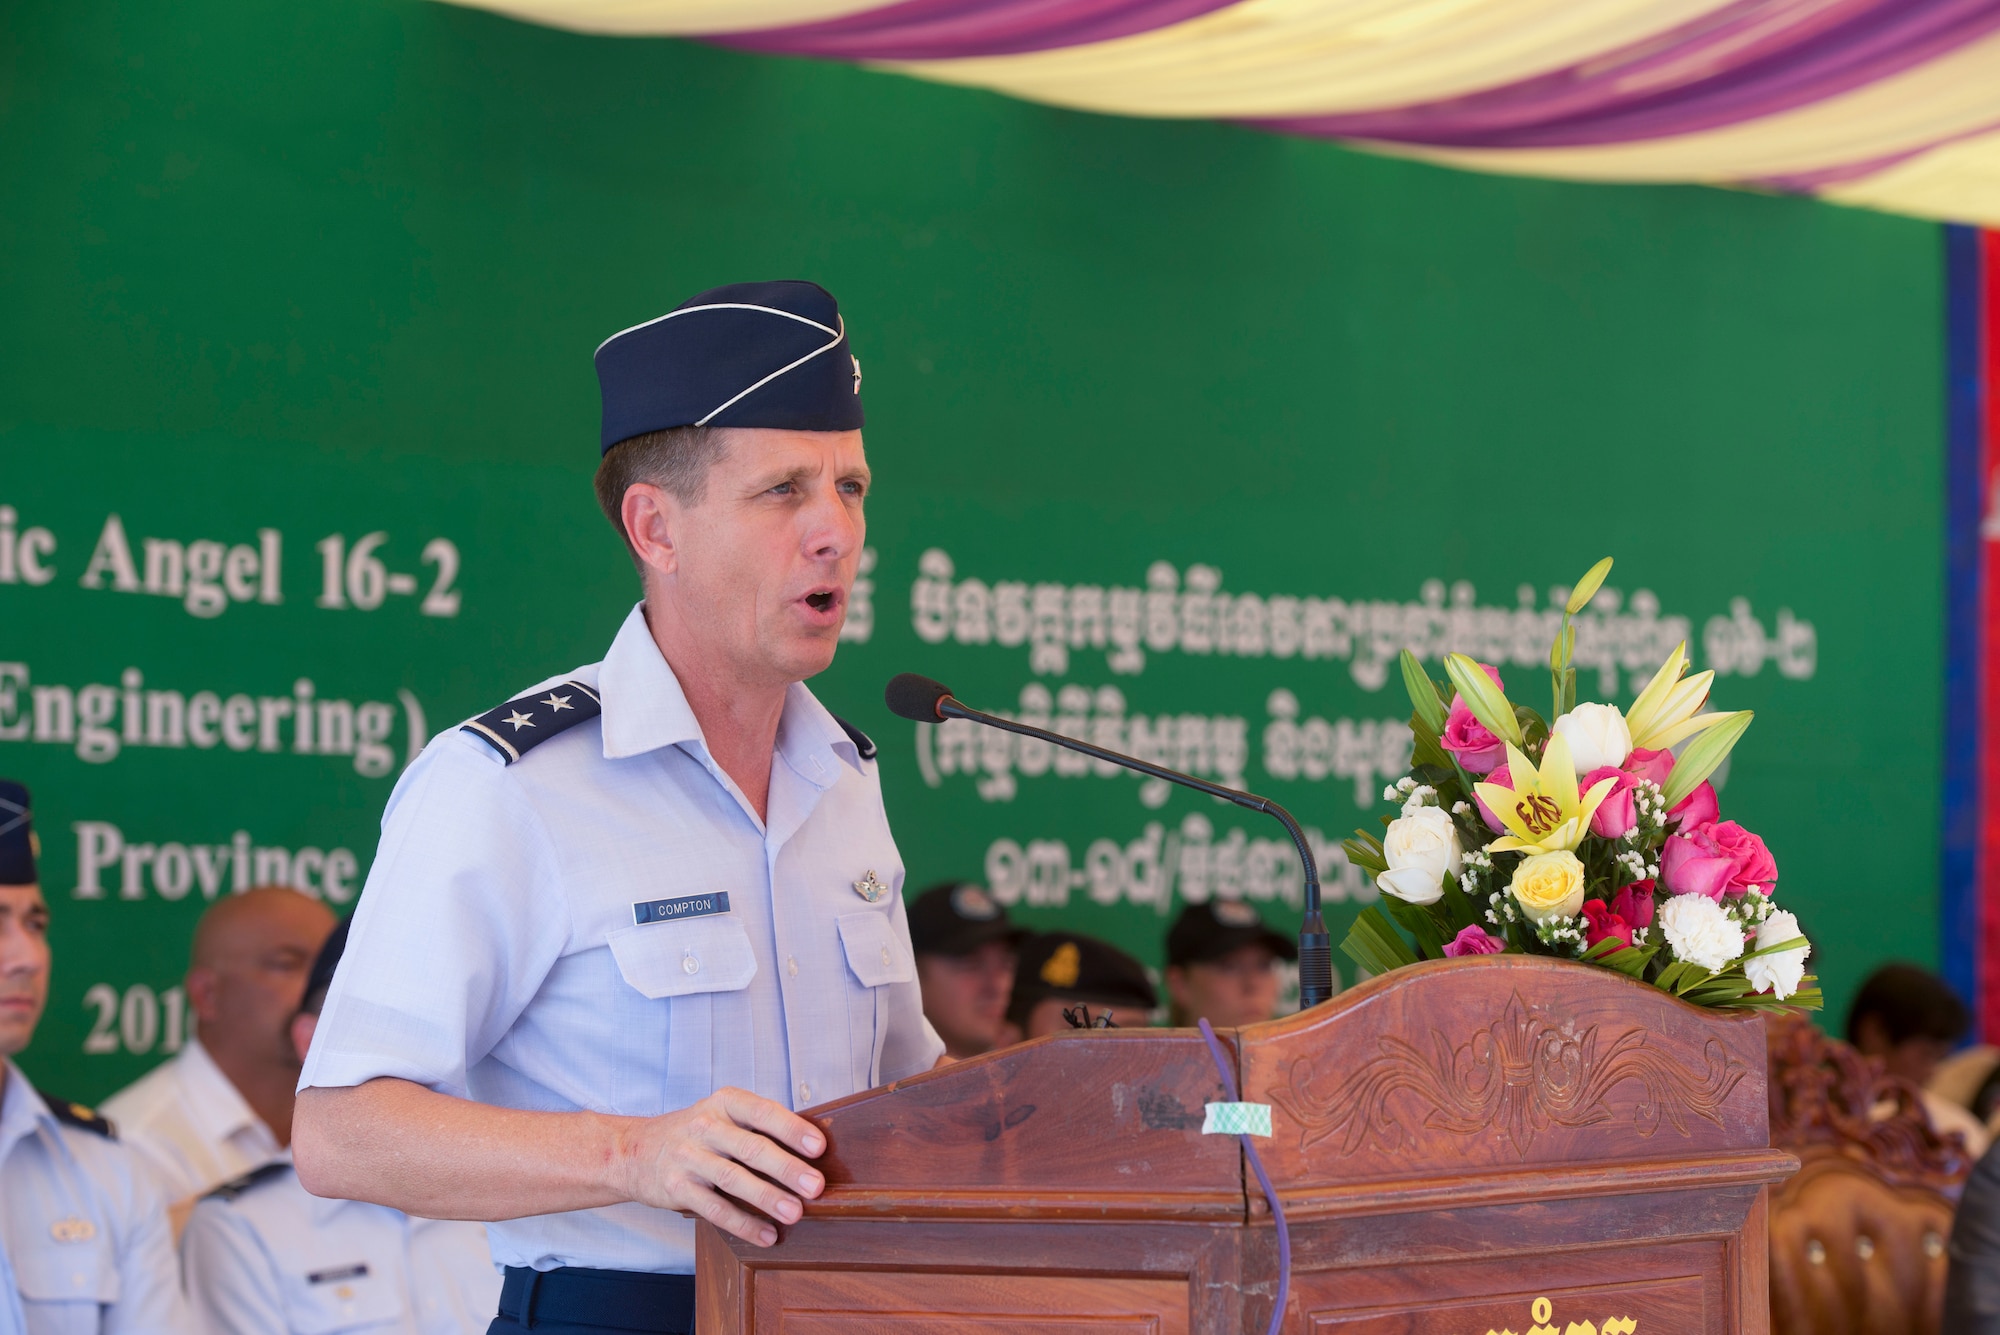 U.S. Air Force Maj. General Michael Compton, Air National Guard Assistant to the commander, Pacific Air Forces, Joint Base Pearl Harbor-Hickam, congratulates the Pacific Angel 16-2 Team on a job well done June 20, 2016, in Kampot Province, Cambodia. The relationships built and sustained in the Indo-Asia-Pacific region through engagements such as Pacific Angel help the United States’and Cambodia’s humanitarian efforts and in preserving peace and stability in the region. (U.S. Air Force photo by Senior Airman Omari Bernard/Released)